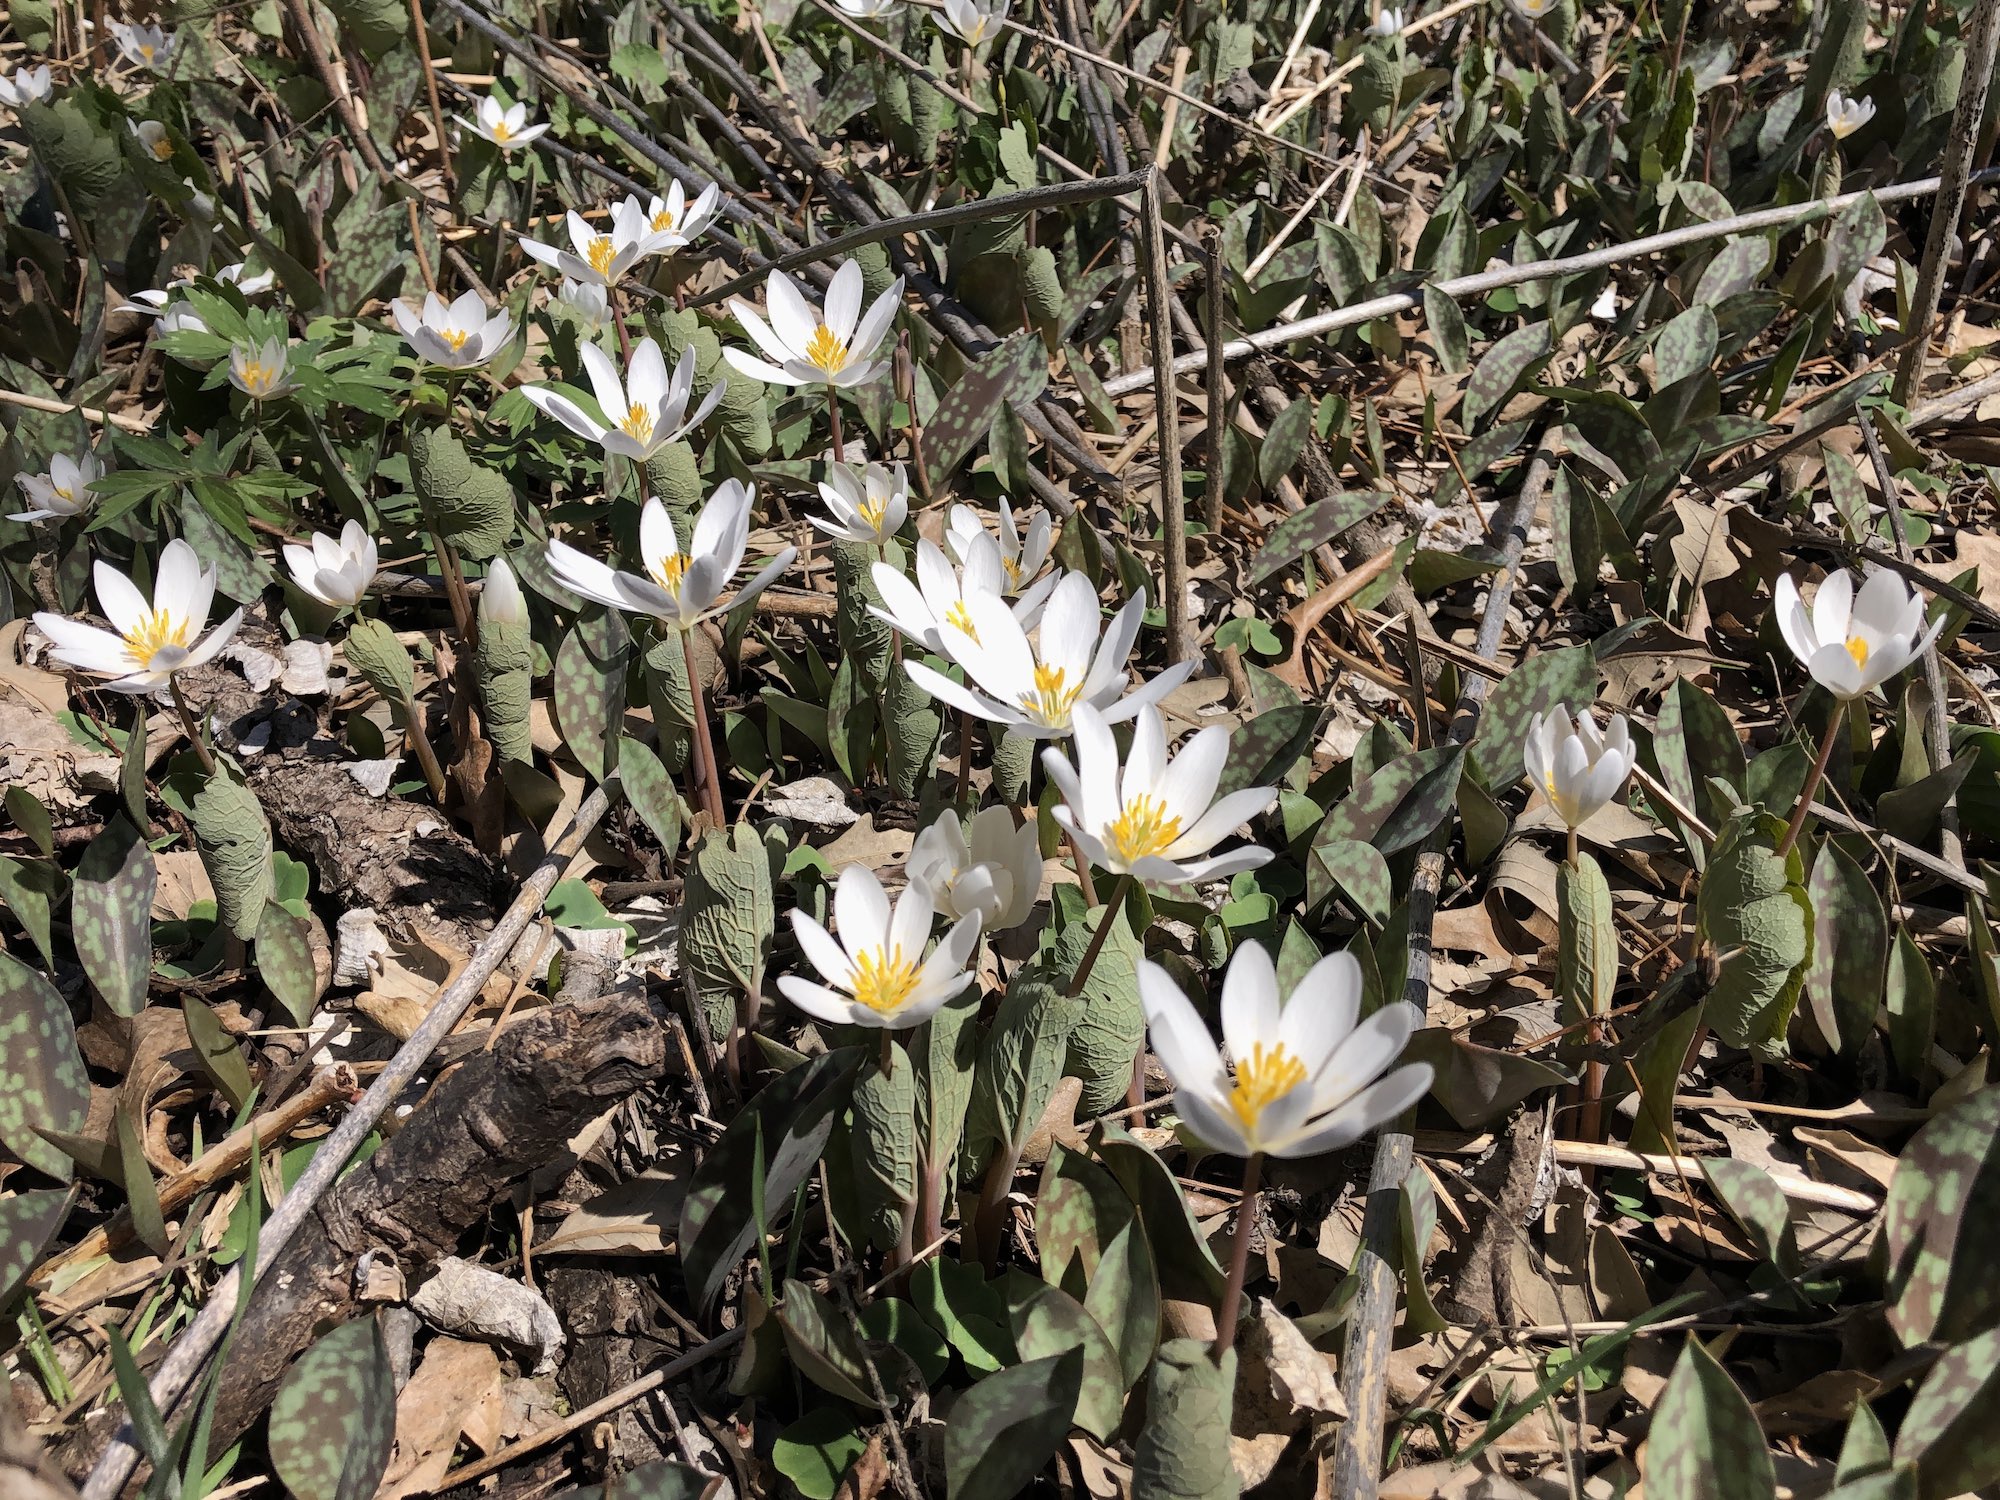 Bloodroot photo taken on April 19, 2019 in Madison, Wisconsin near Council Ring.